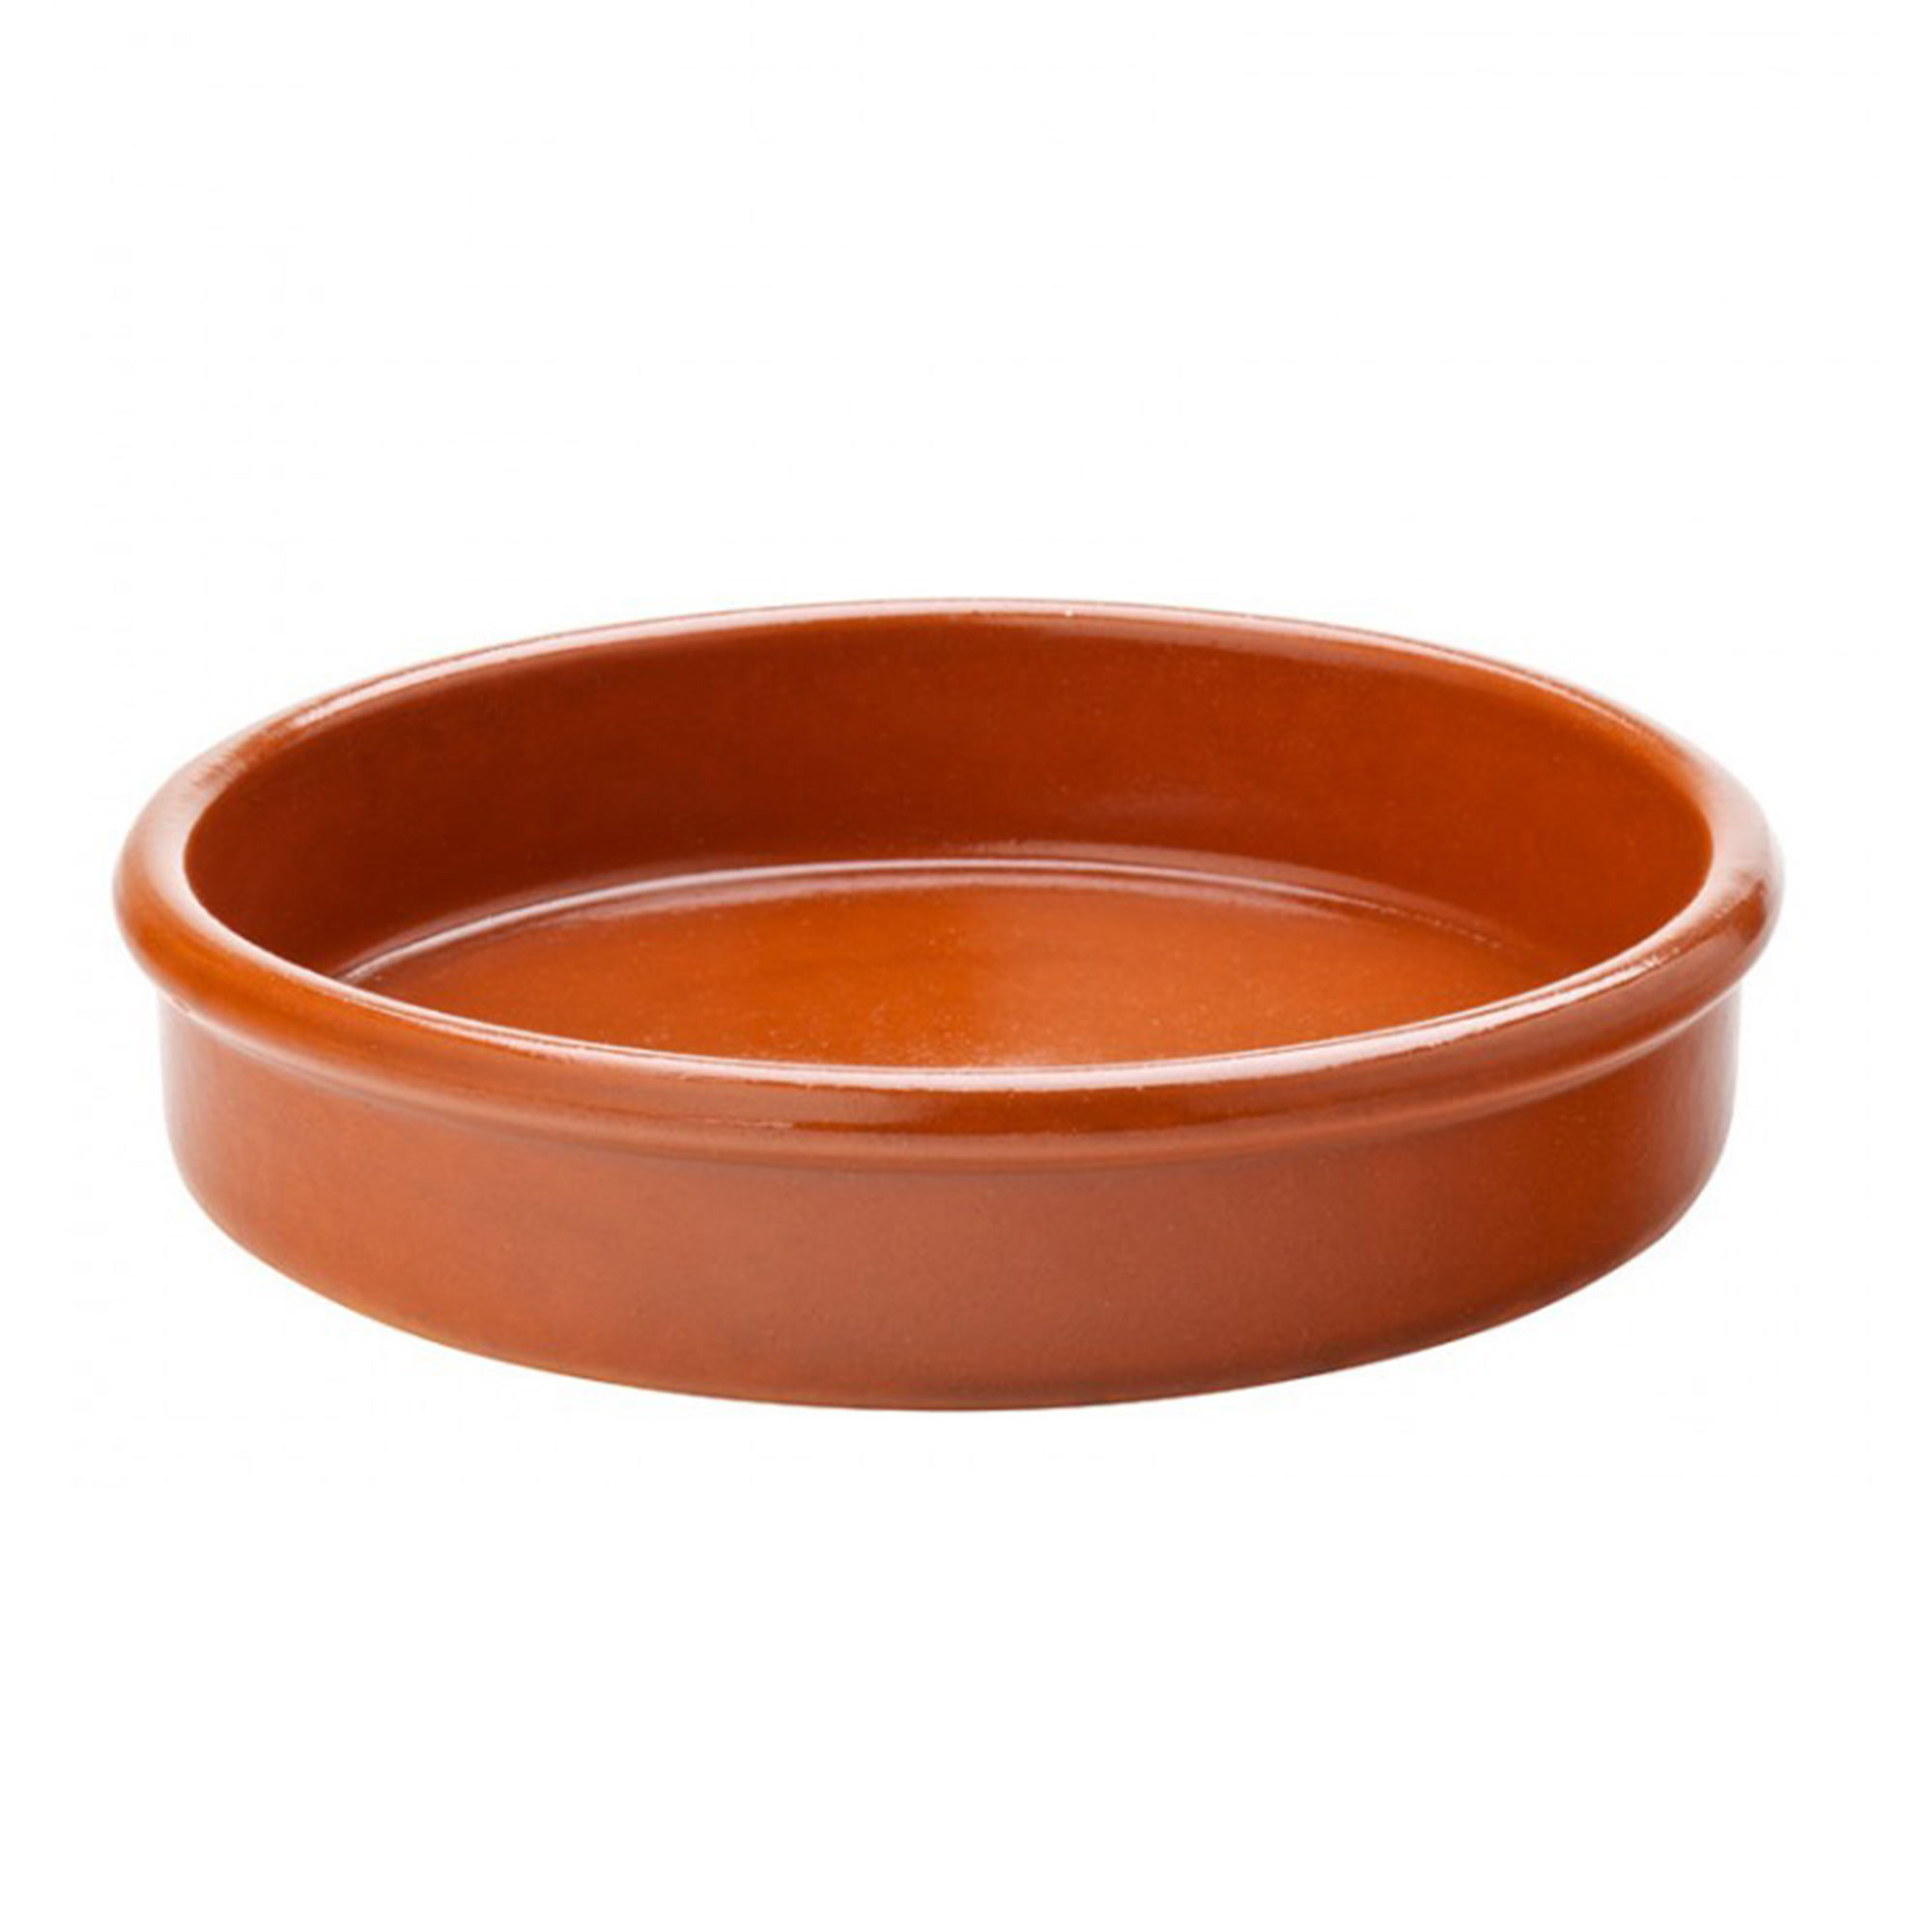 Glazed Terracotta 14cm Round Oven Safe Baking Spanish Tapas Serving Party Serving Shallow Dish Red 